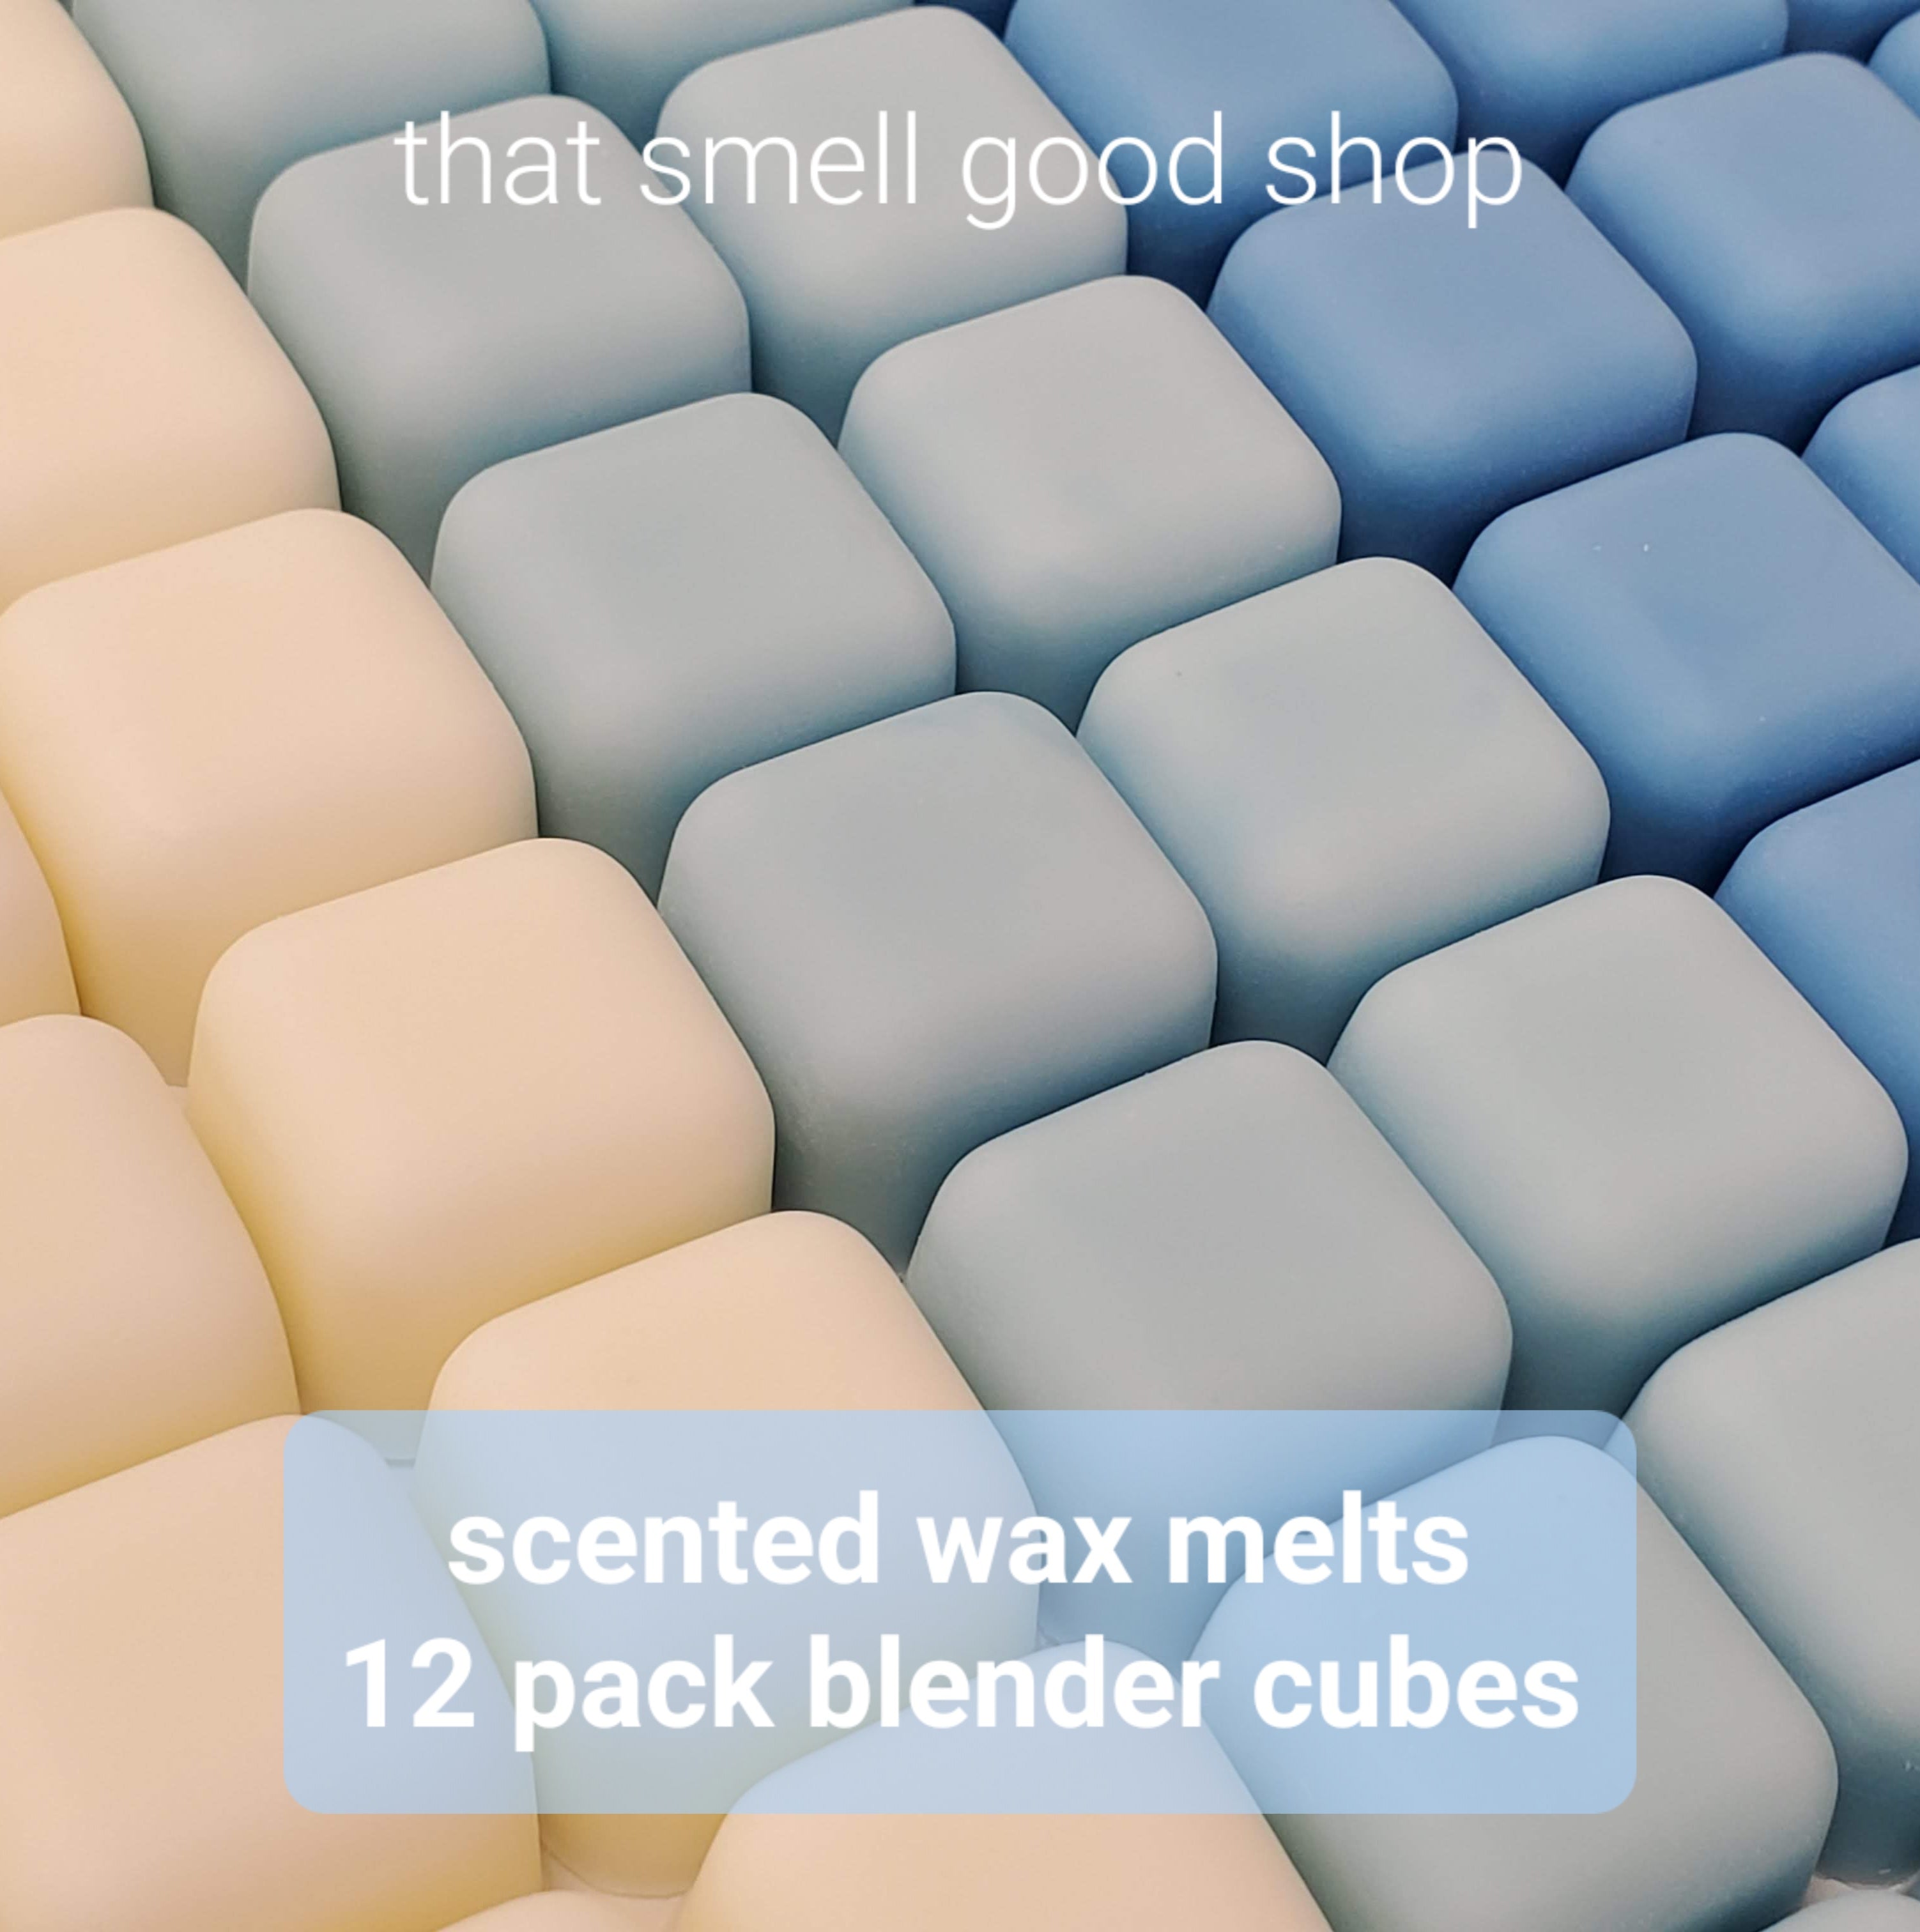 Cozy Collection Wax Melts 12-Pack